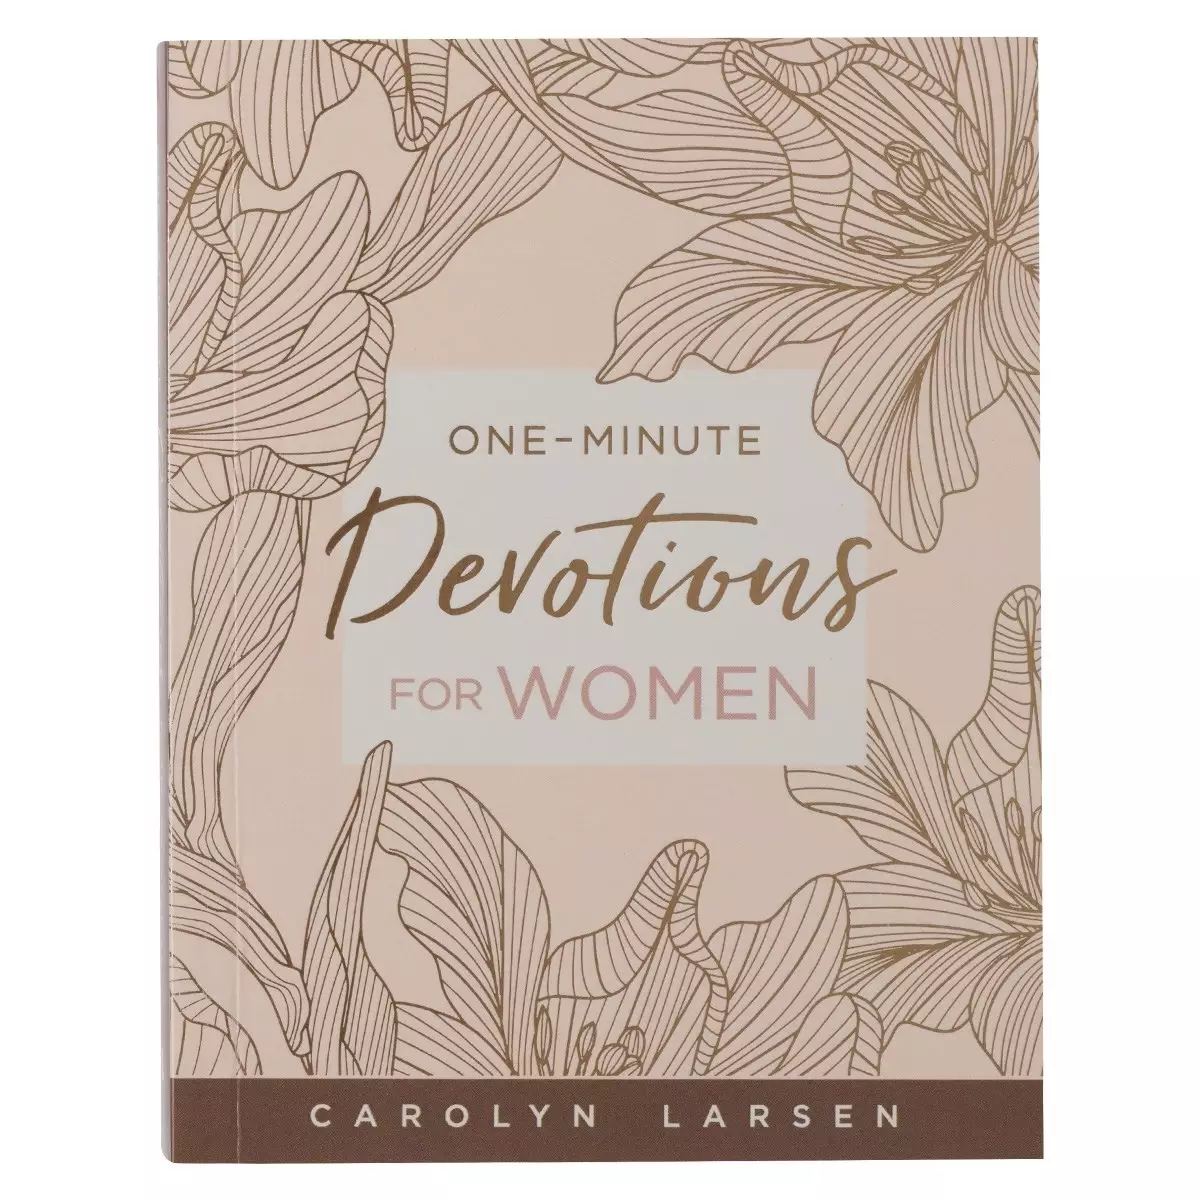 One-Minute Devotions for Women Softcover